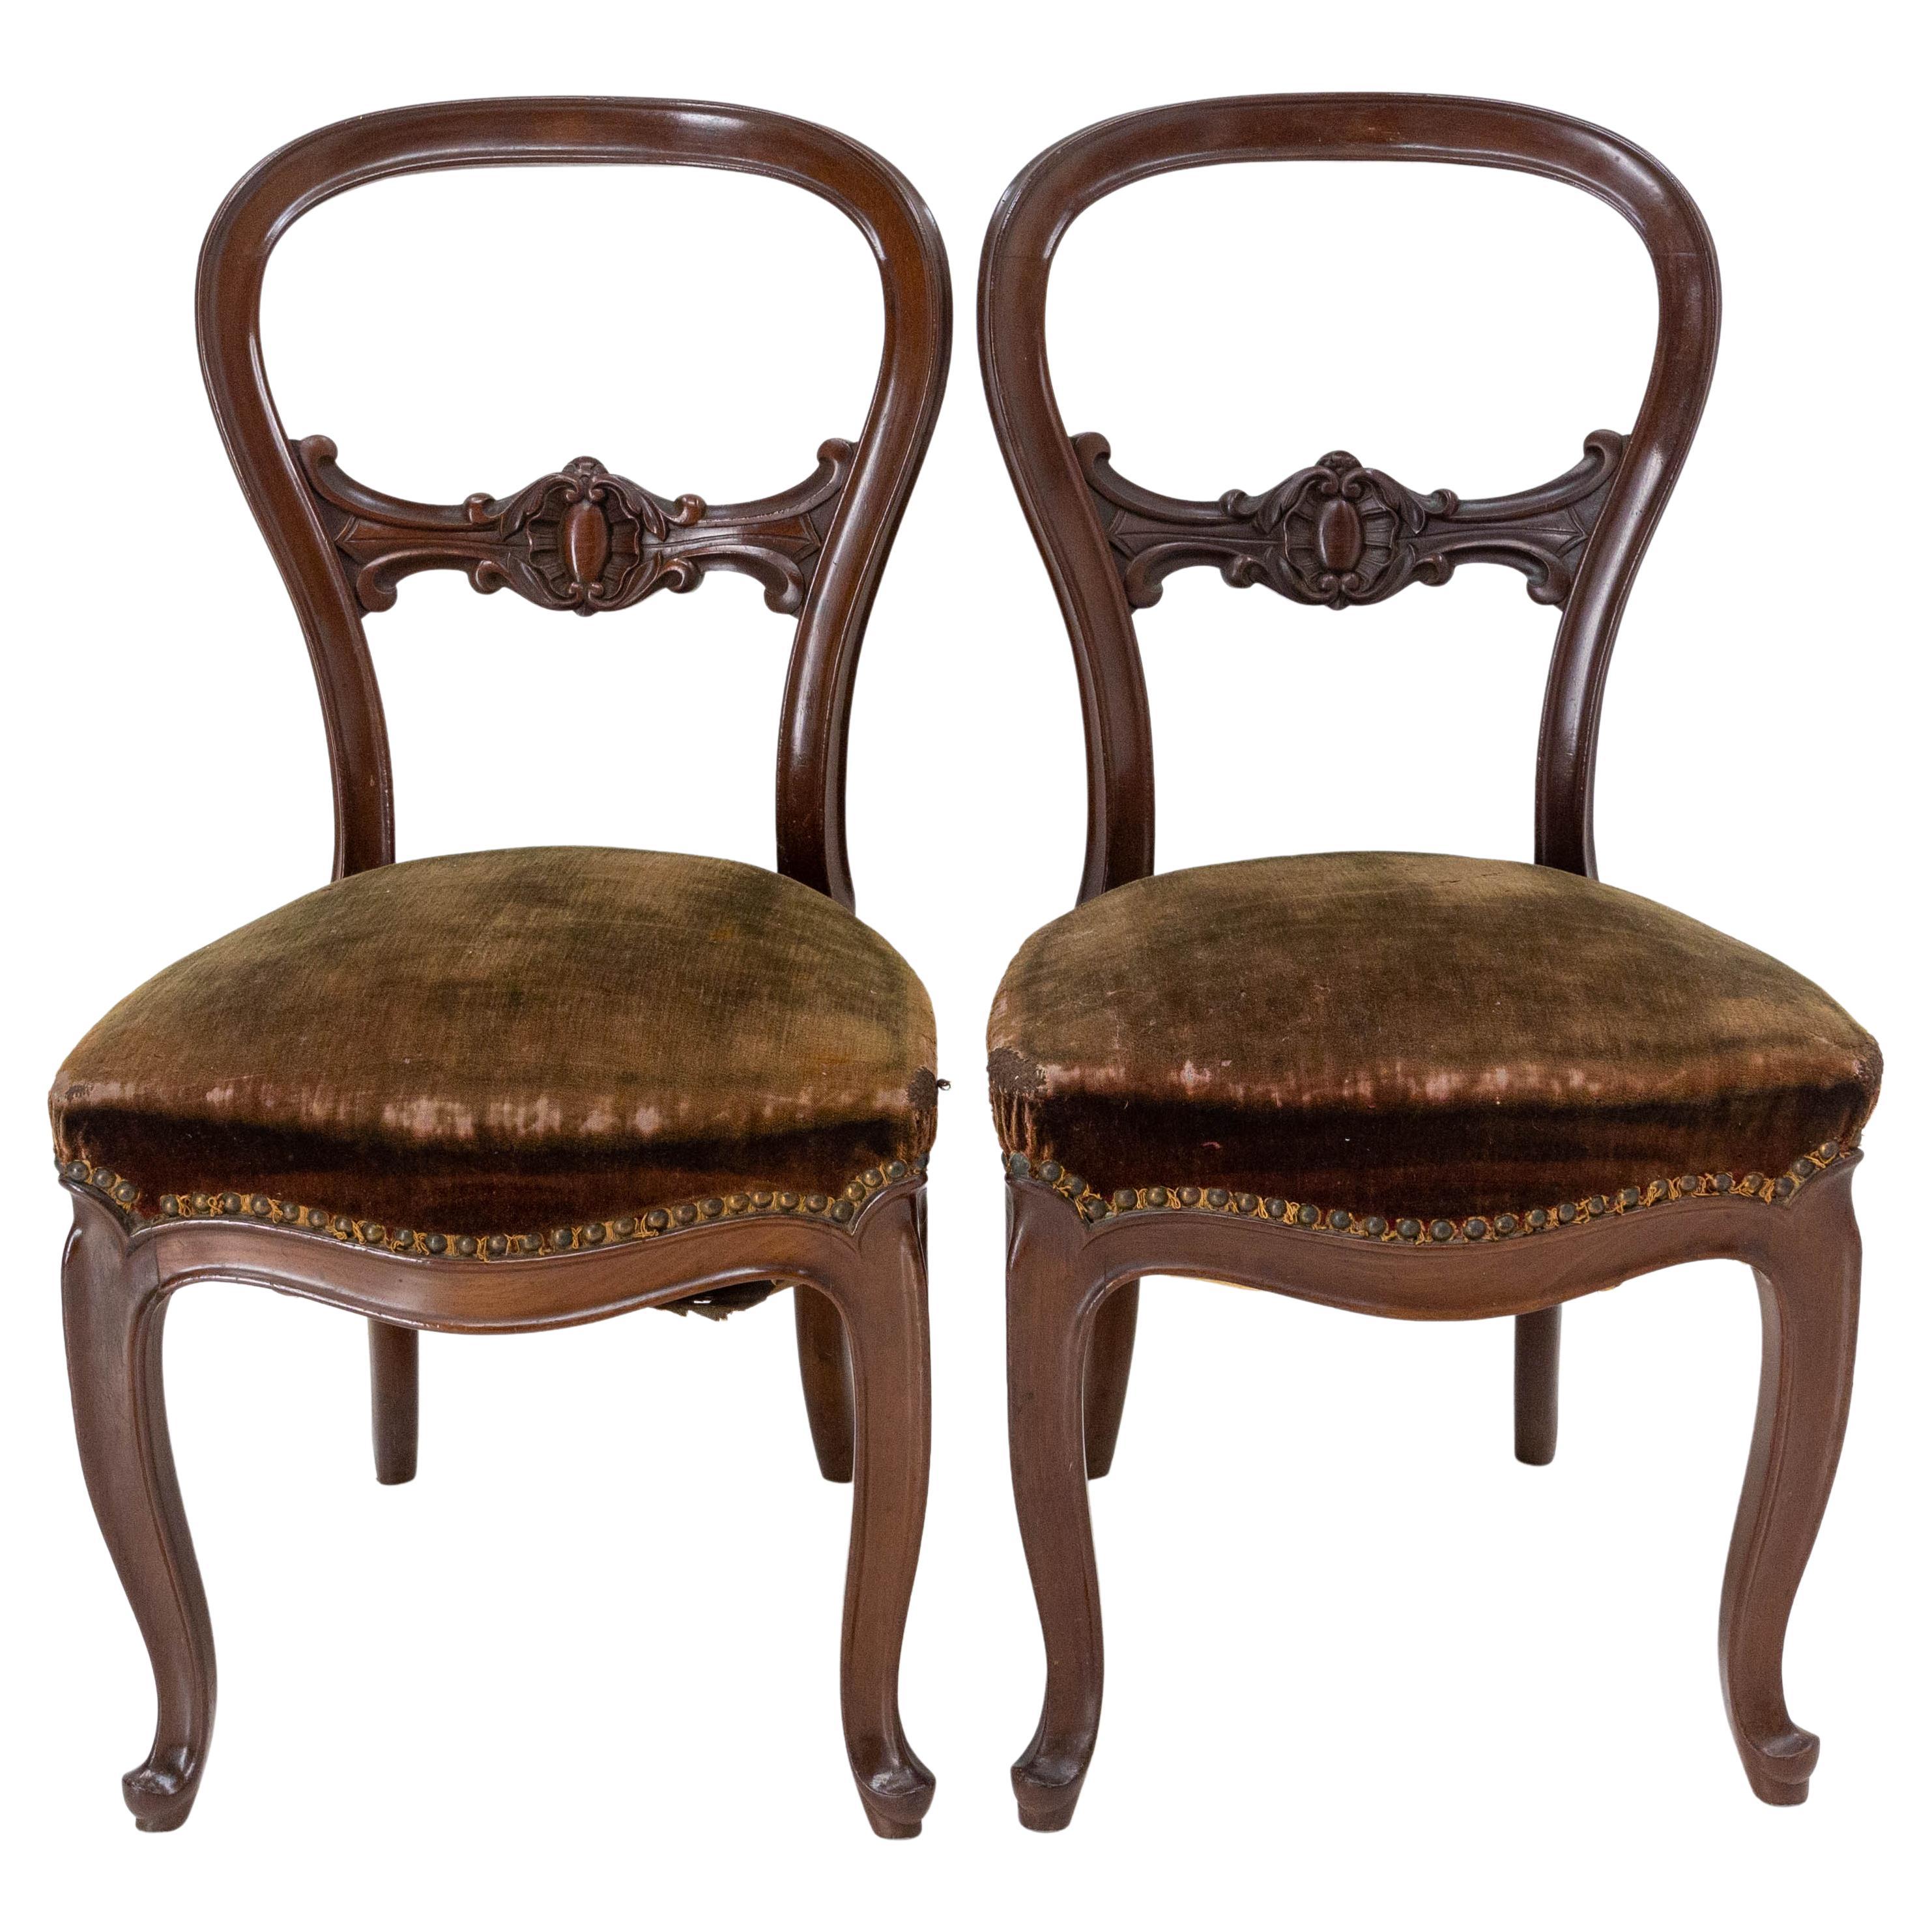 Pair of Napoleon III Exotic Wood and Velvet Chairs French, Late 19th Century